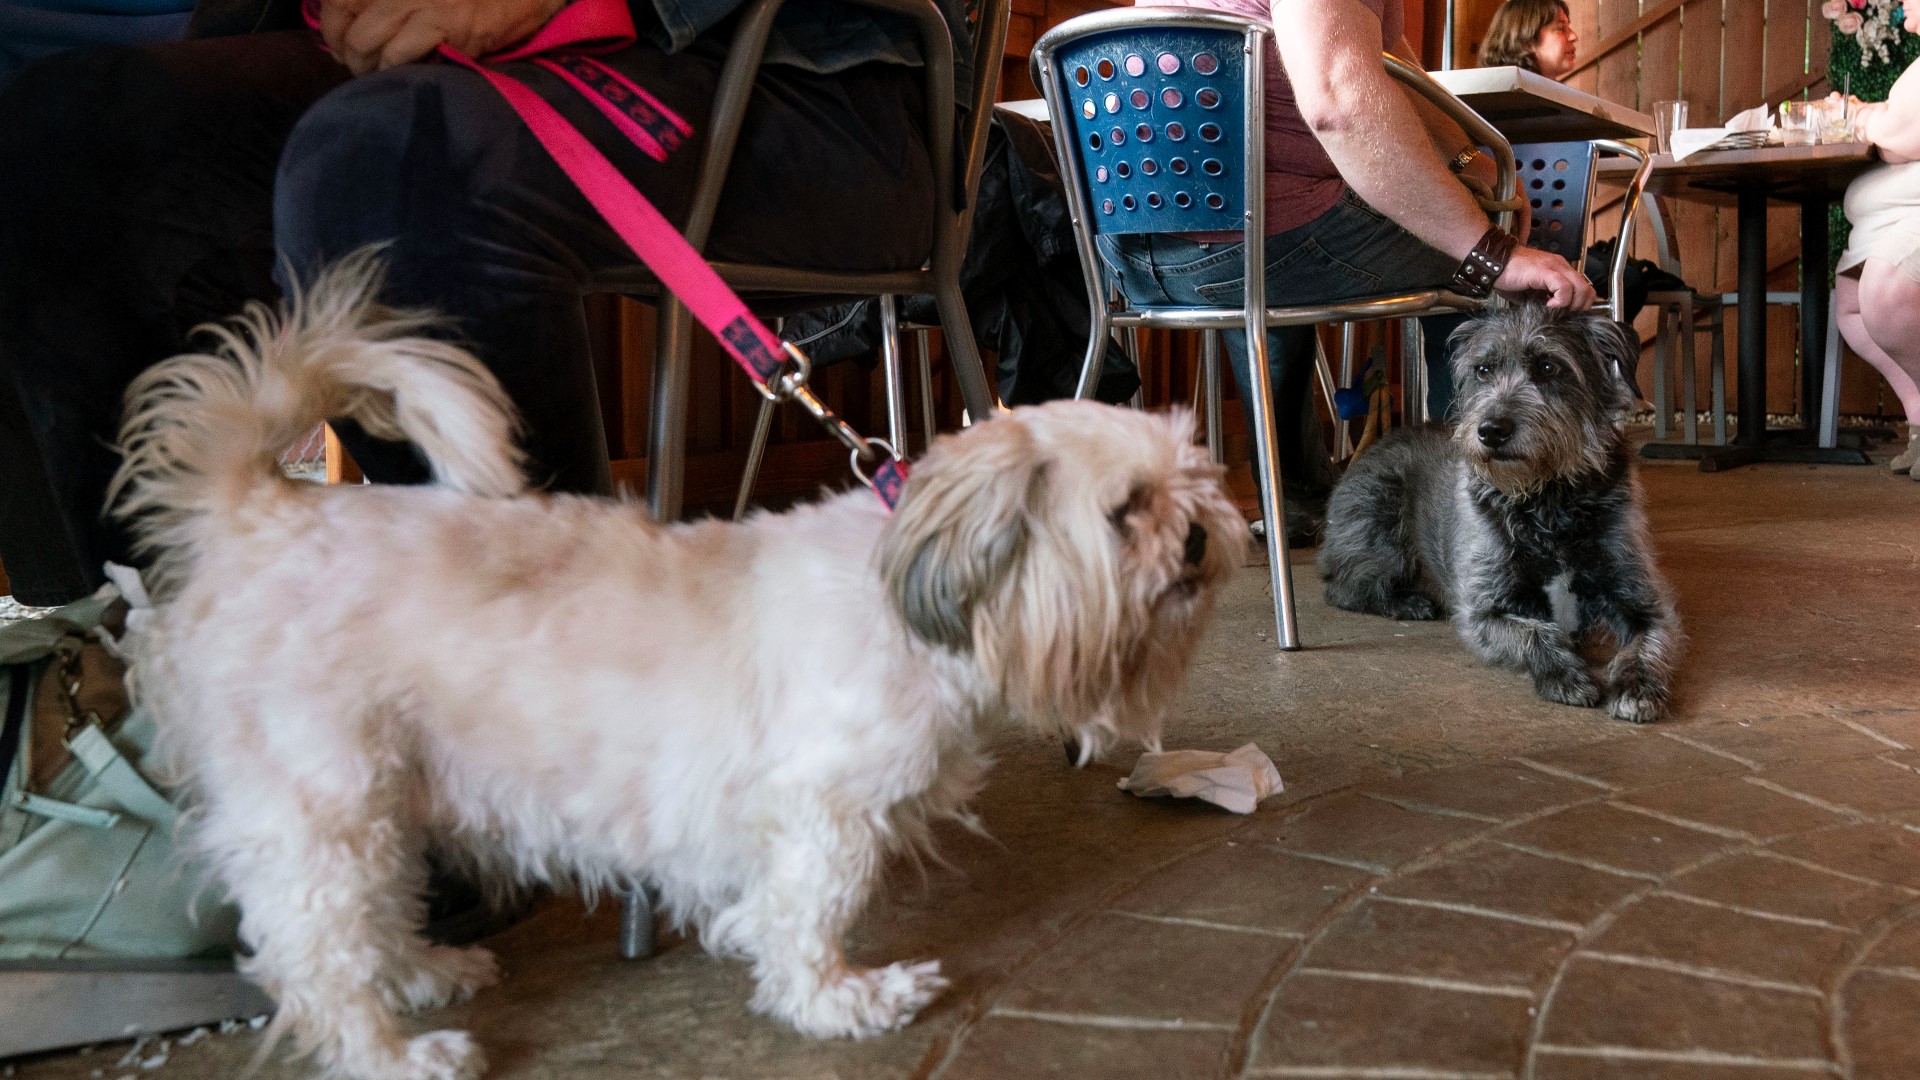 Just in time for the summer dining season, the U.S. government has issued new guidance saying restaurants can have dogs in their outdoor spaces.